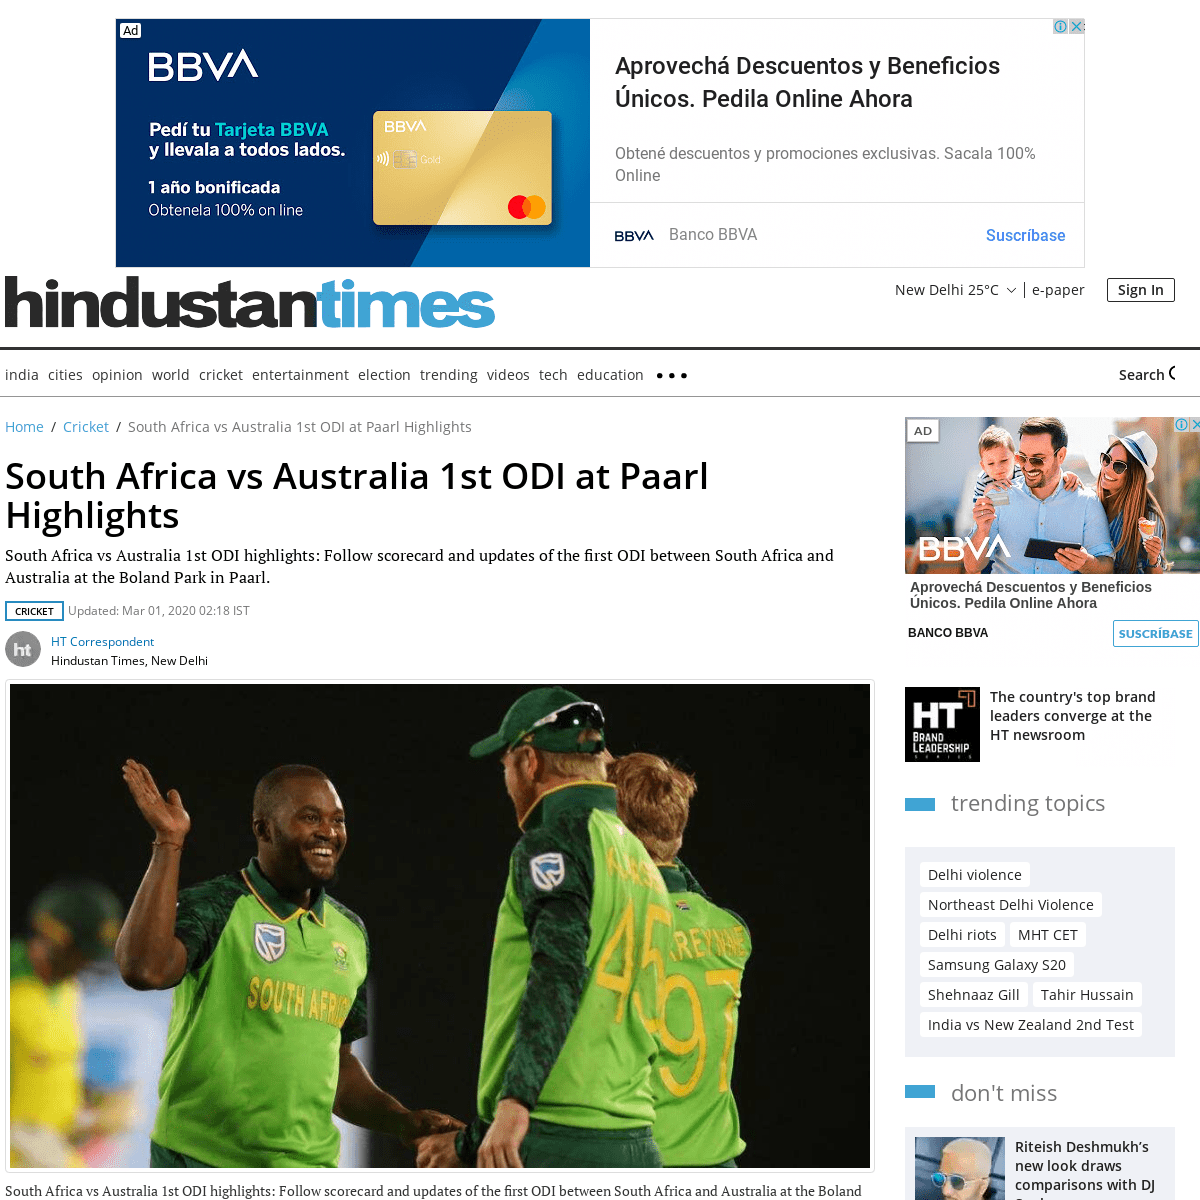 A complete backup of www.hindustantimes.com/cricket/south-africa-vs-australia-live-score-1st-odi-at-paarl-sa-vs-aus-live/story-P